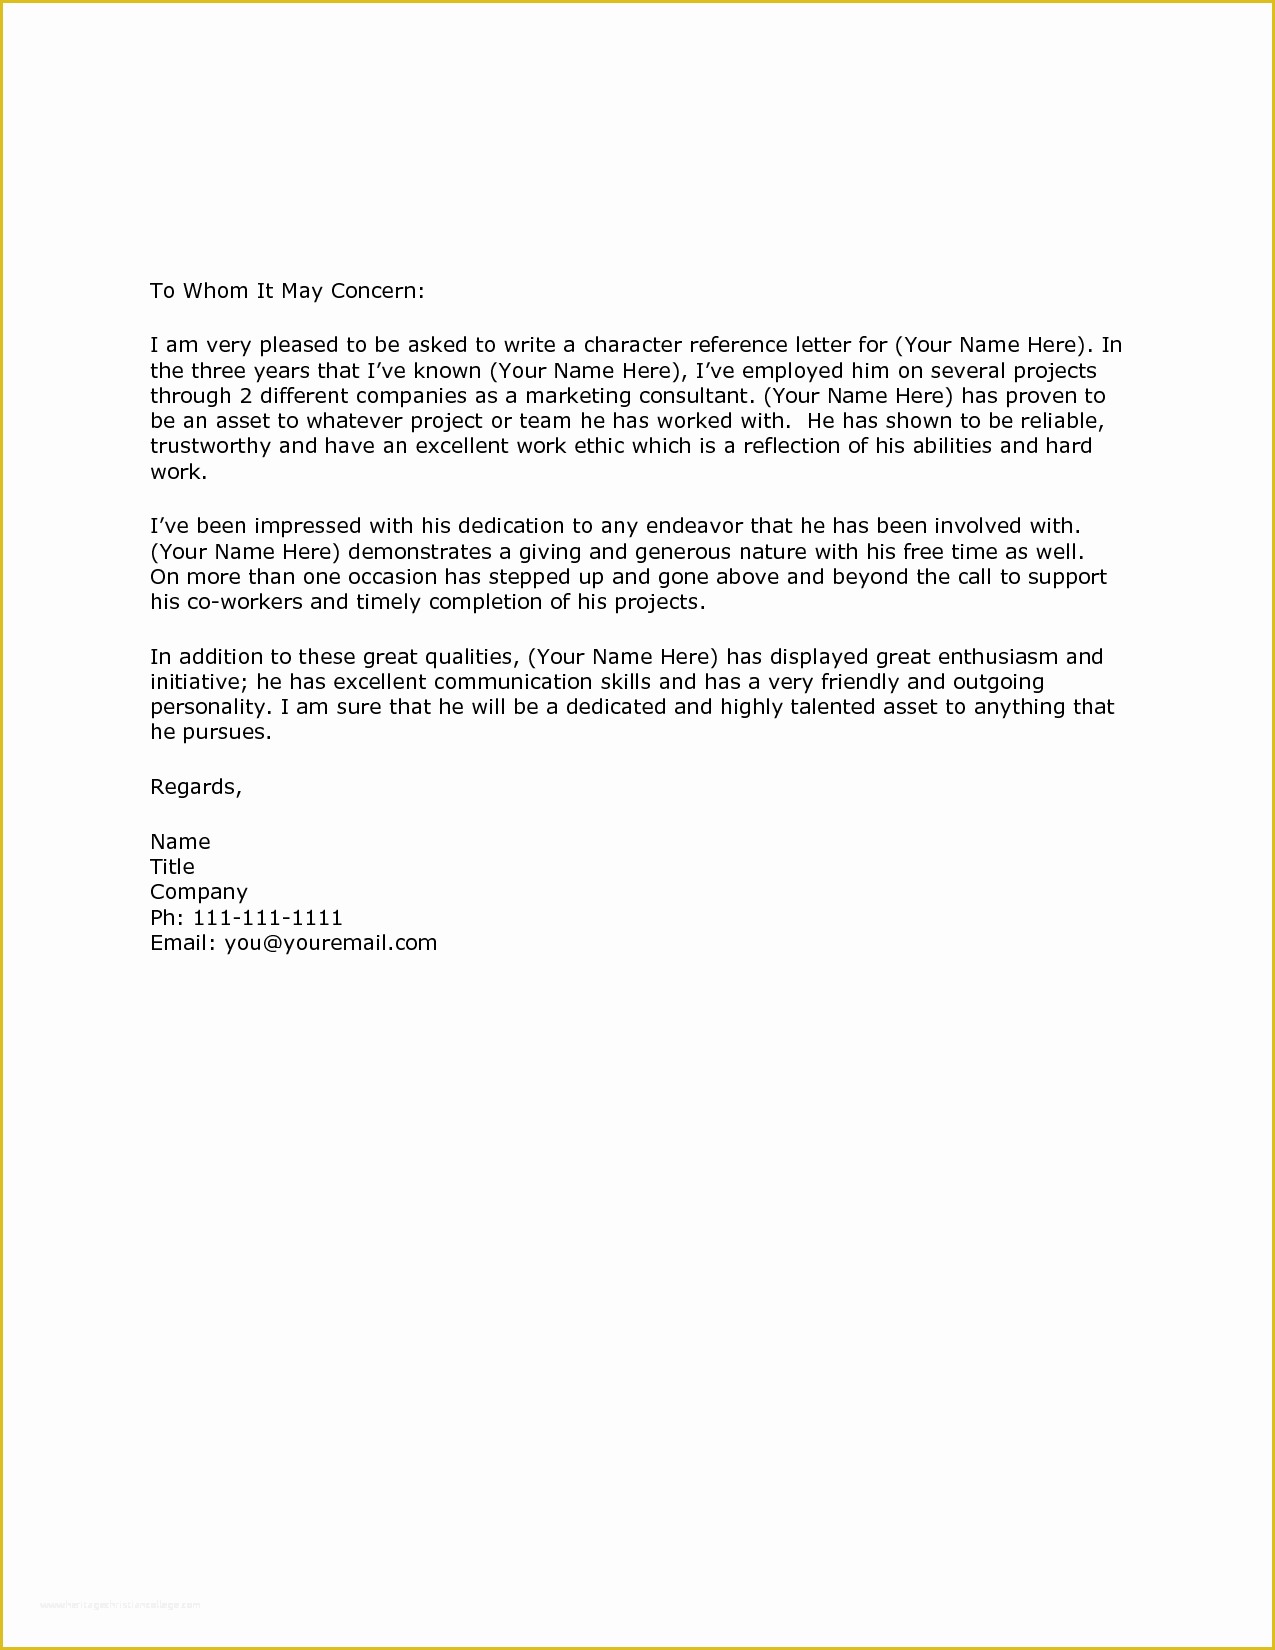 Personal Reference Letter Template Free Of Letter Personal Reference Letter